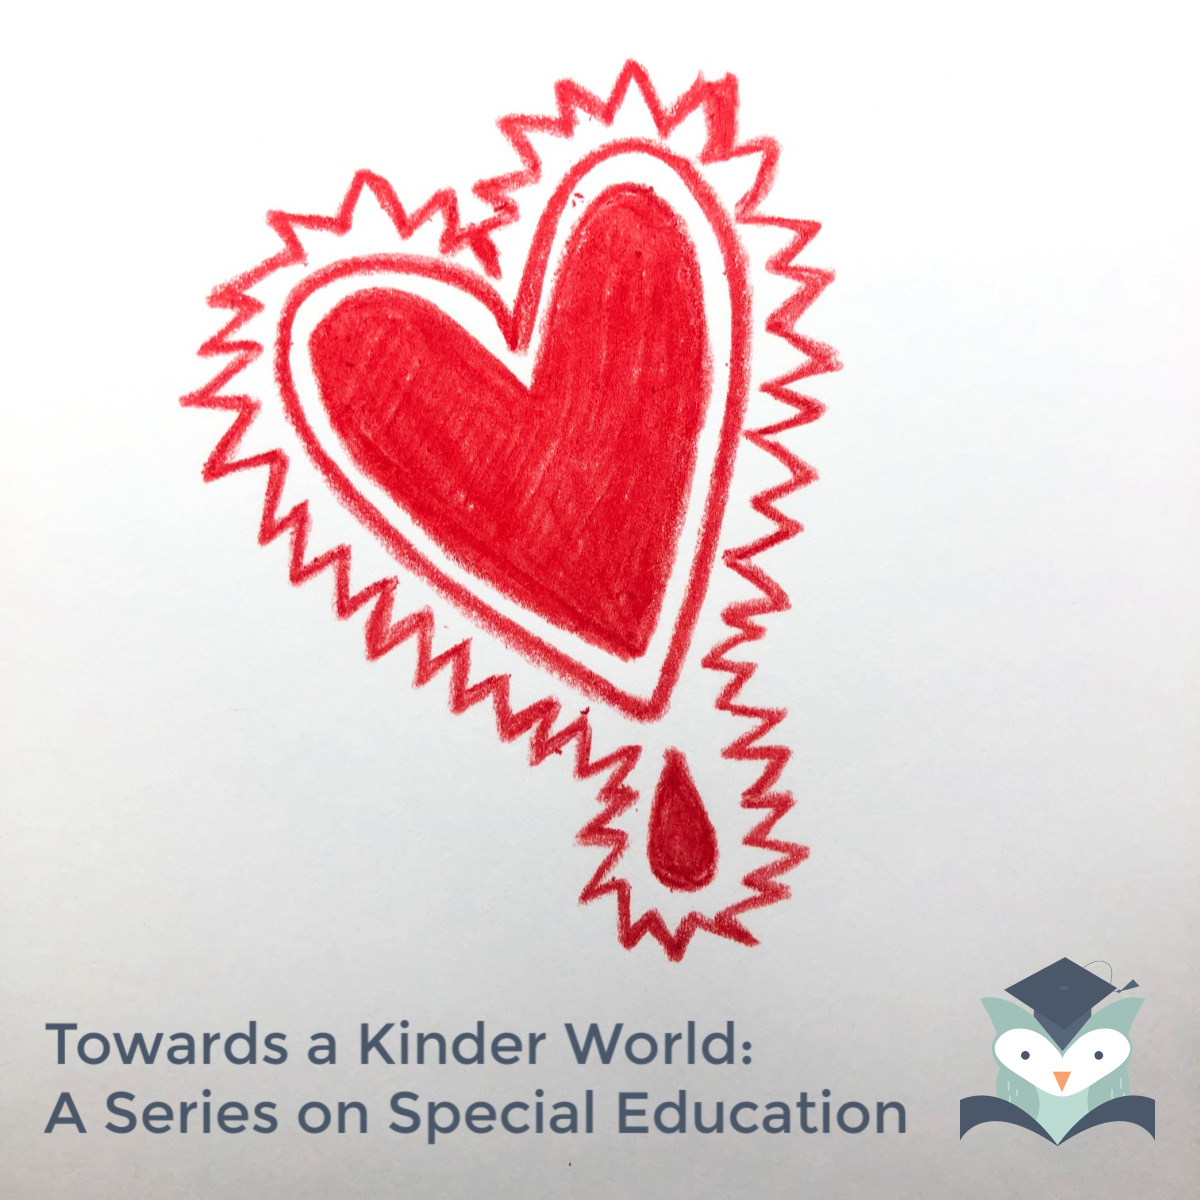 Heart graphic and title "Towards a Kinder World: A Series on Special Education"